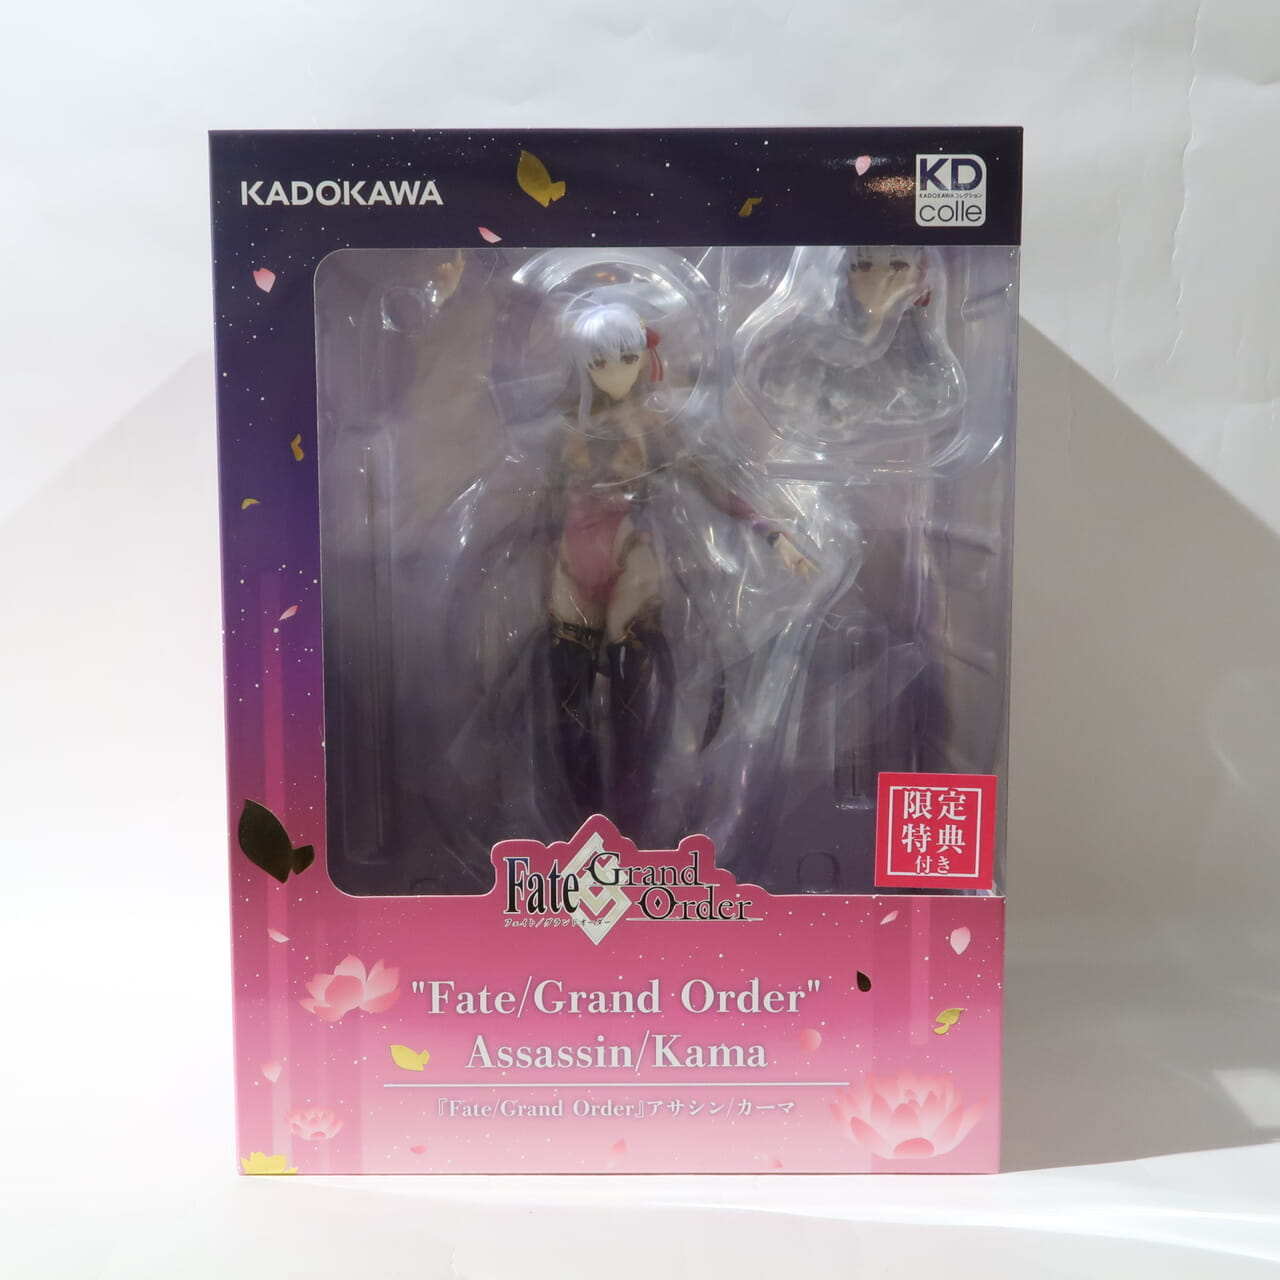 Fate/Grand Order KDcolle 1/7 塗装済み完成品 フィギュア アサシン/カーマ 限定特典付き